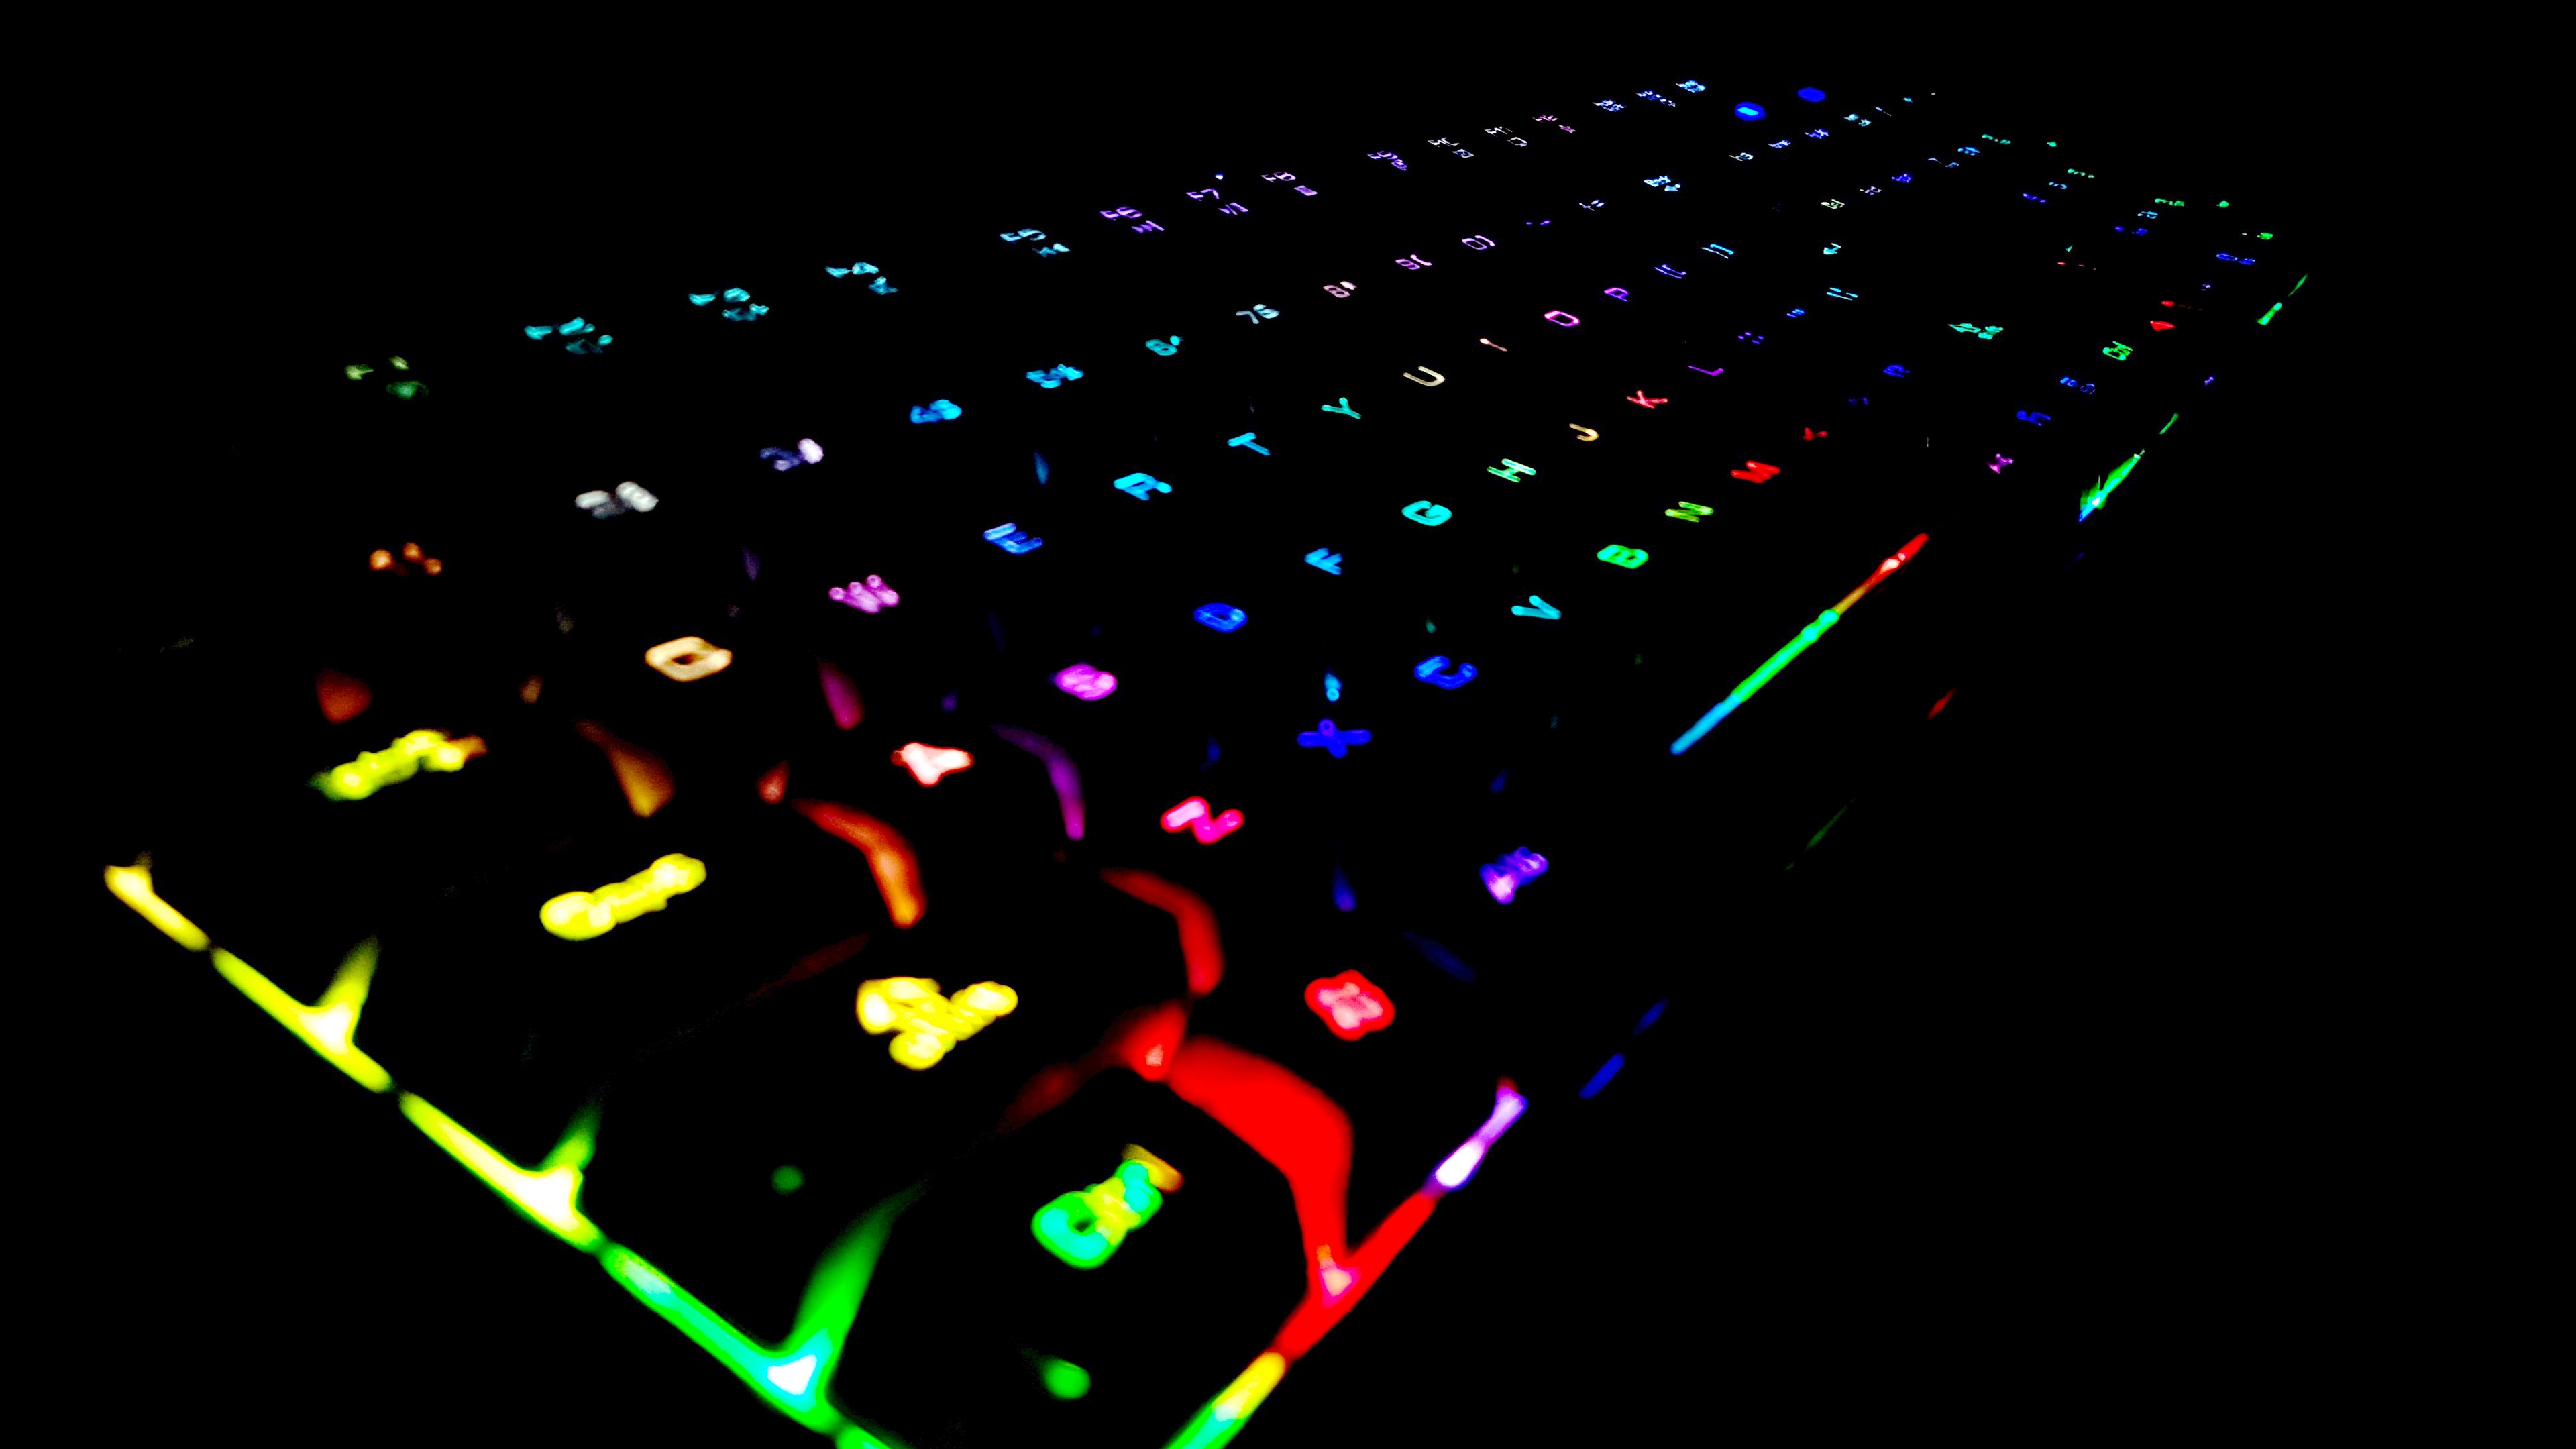 50,000+ Rgb Keyboard Pictures | Download Free Images on Unsplash